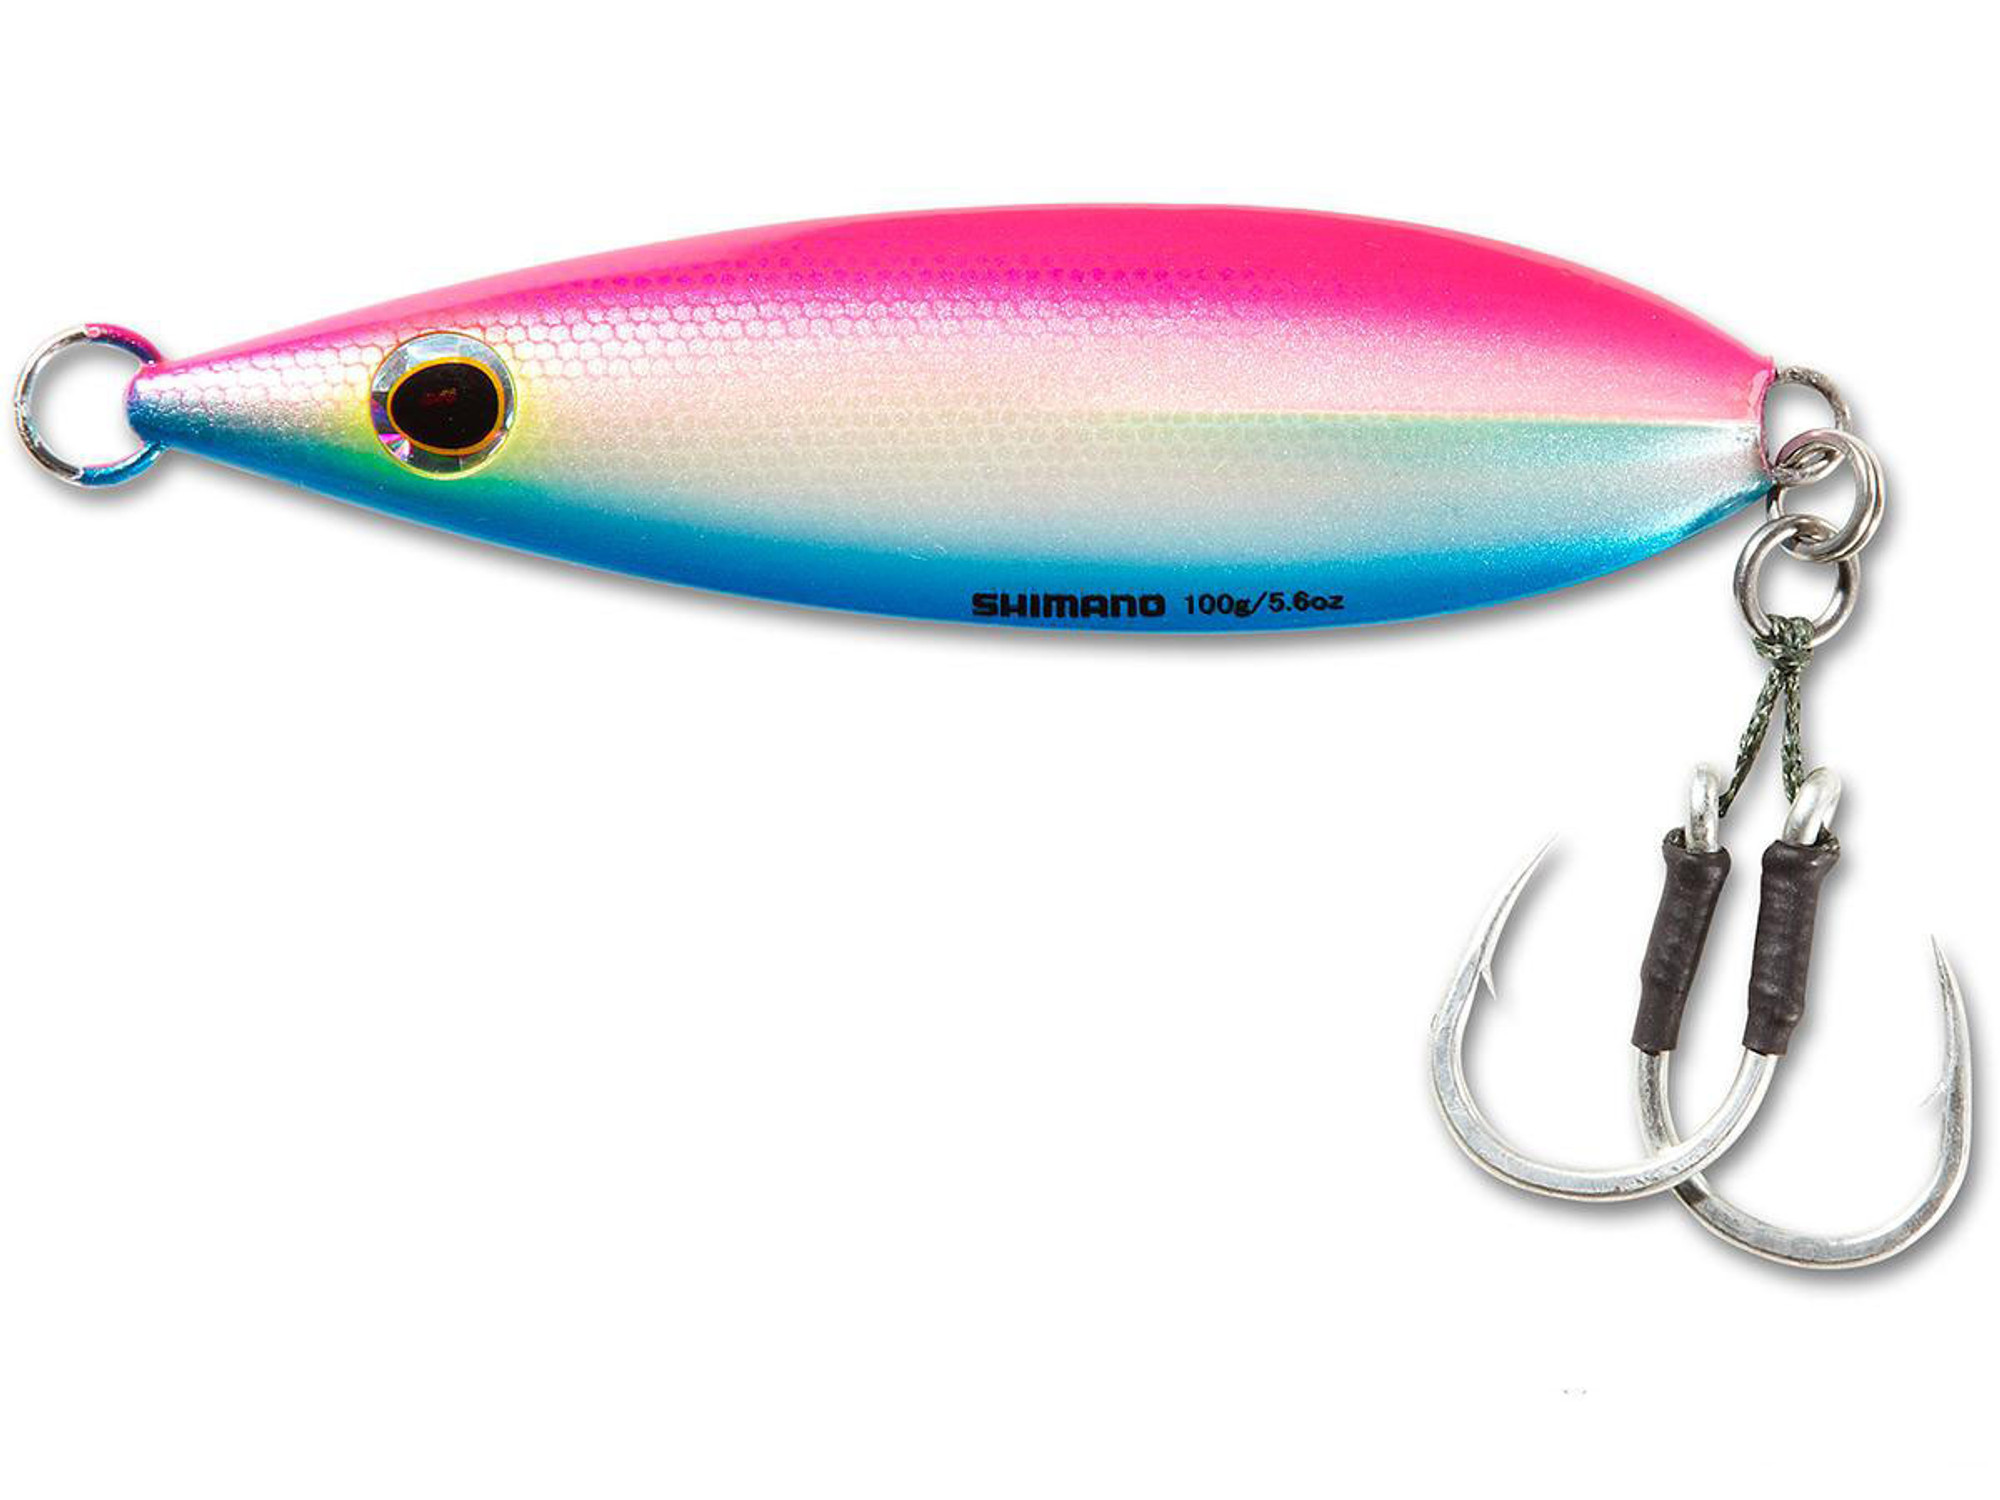 Shimano Butterfly Flat Fall Jig (Color: Pink Blue / 100g)